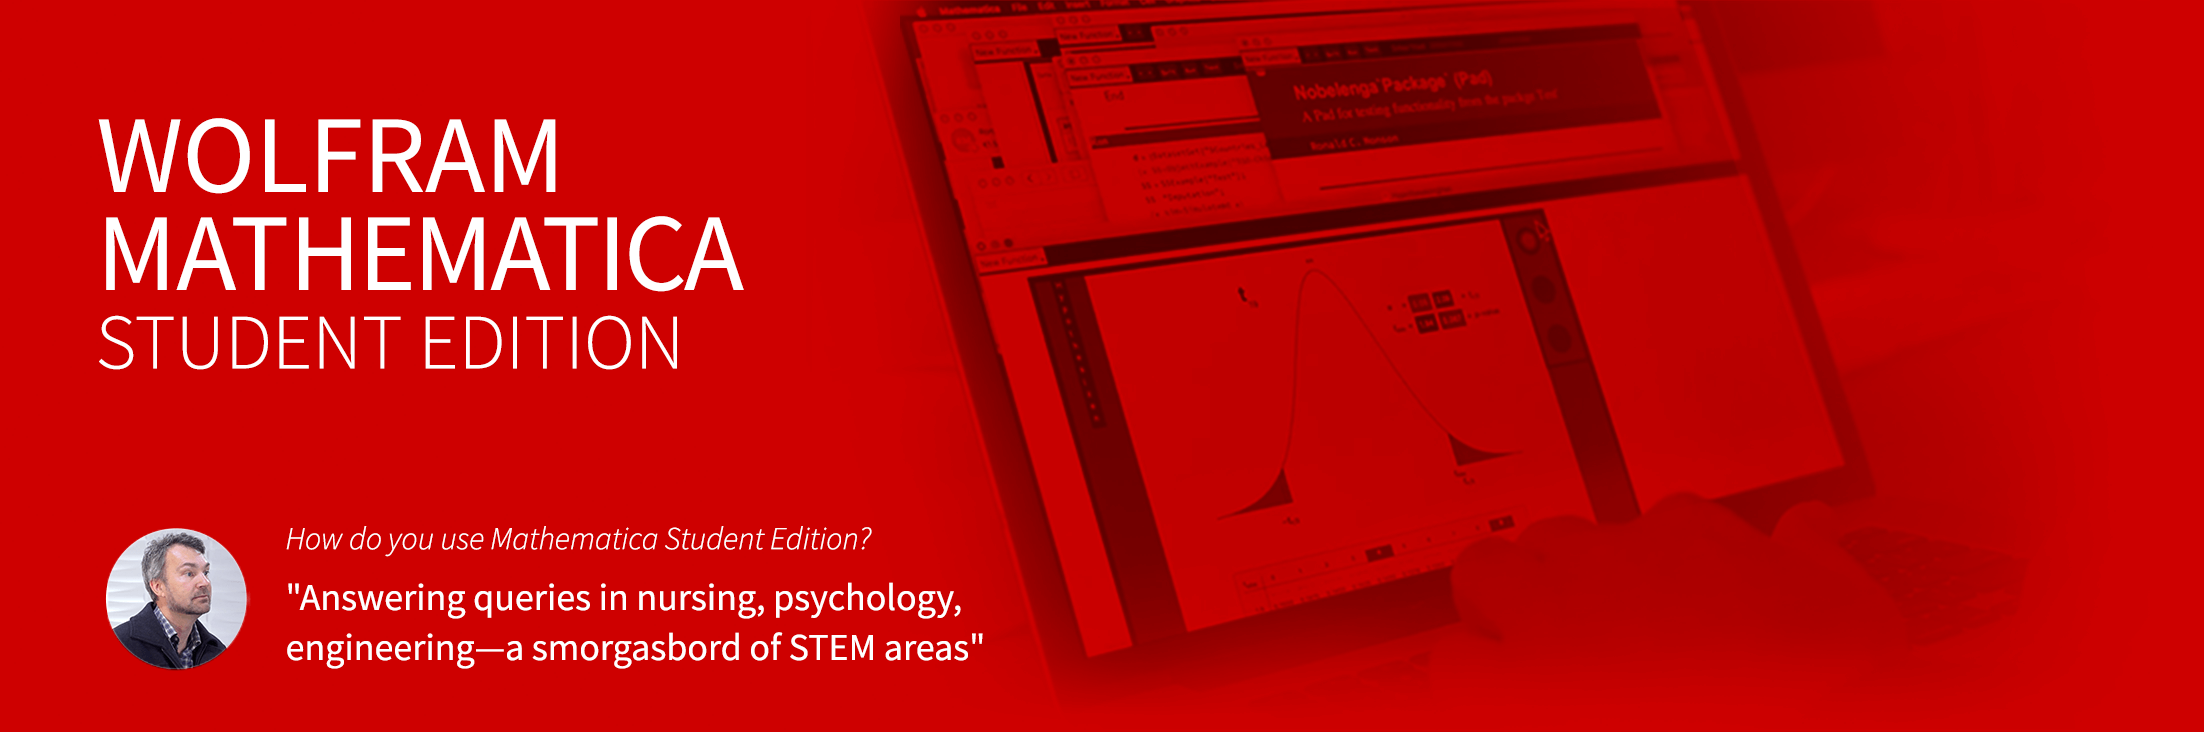 Answering queries in nursing, psychology, engineering—a smorgasboard of STEM areas